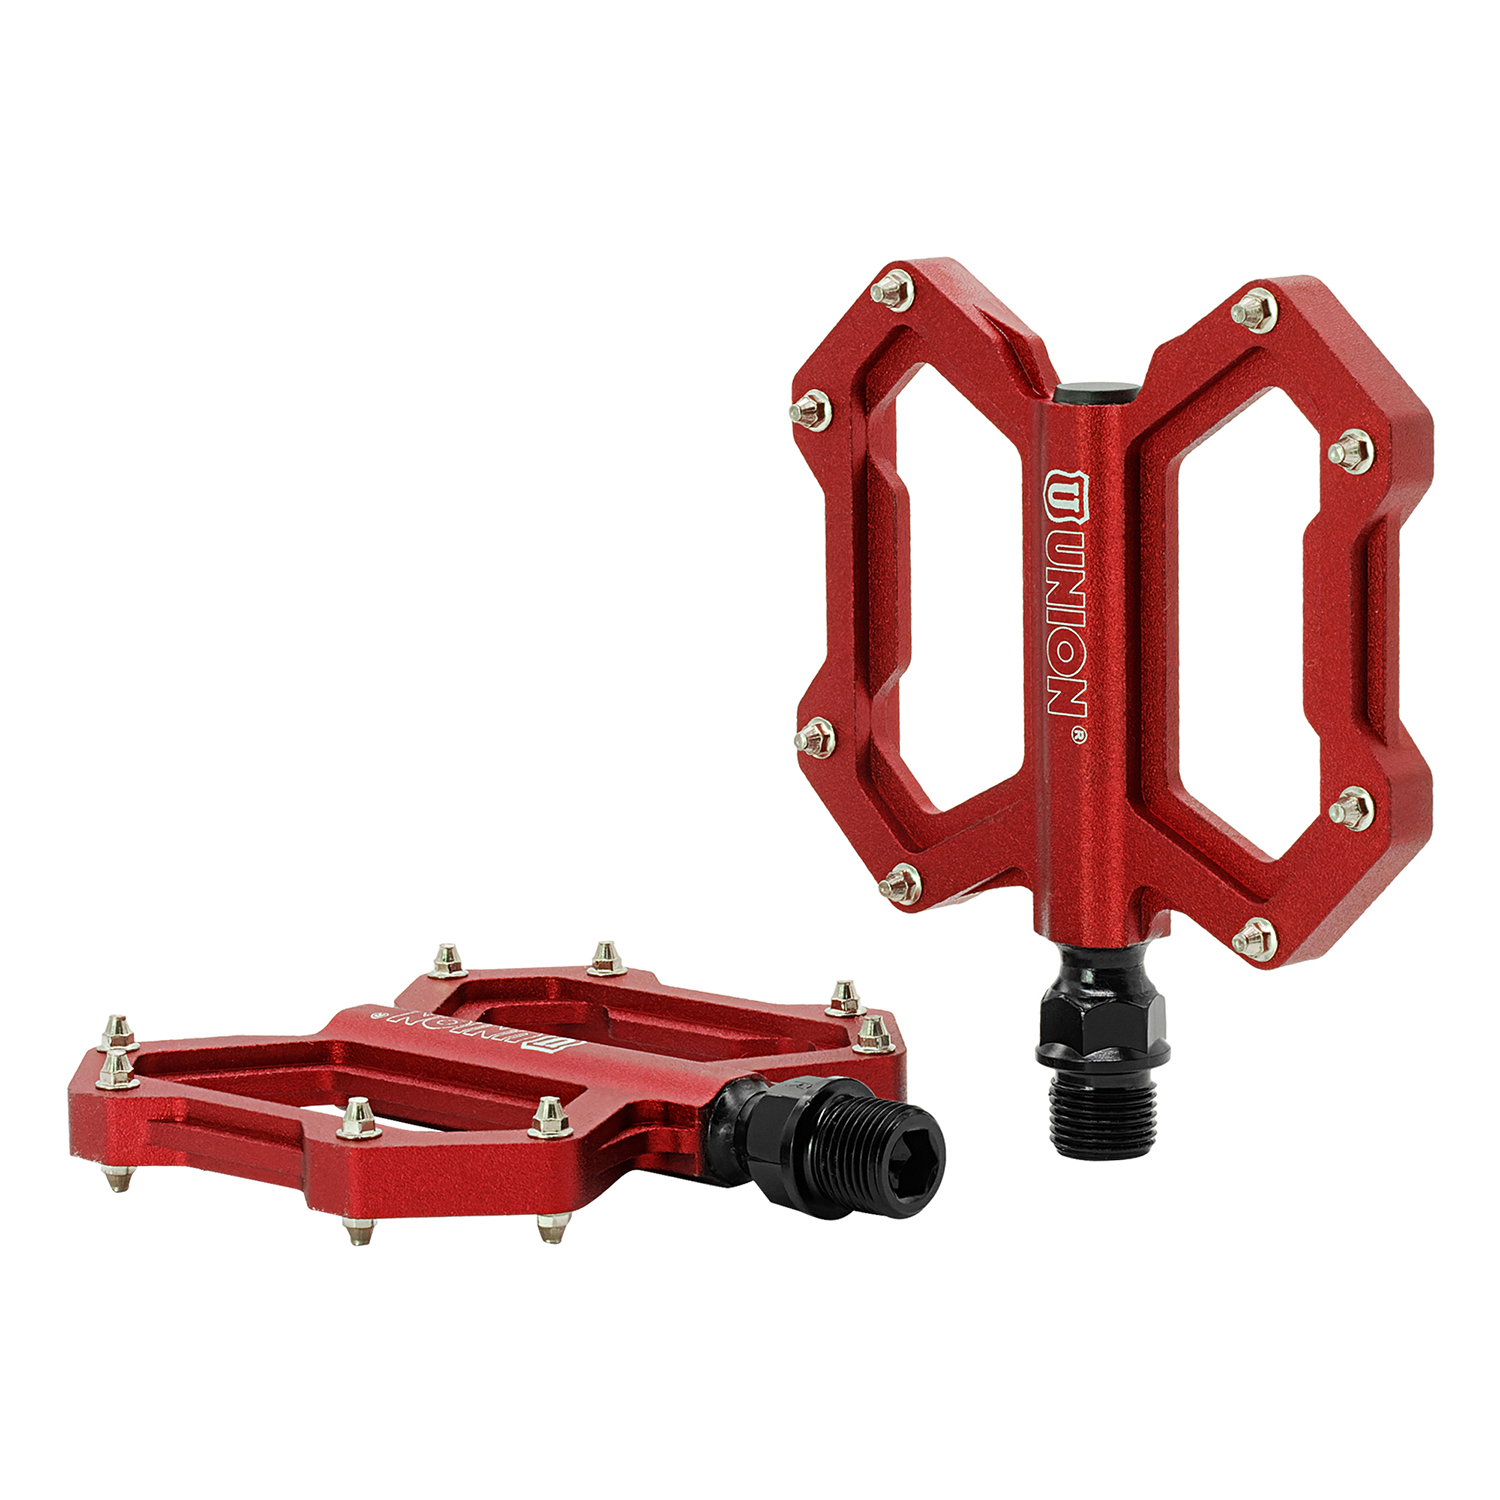 BMX-Pedal ALU UNION SP 1210 Nadellager in Rot